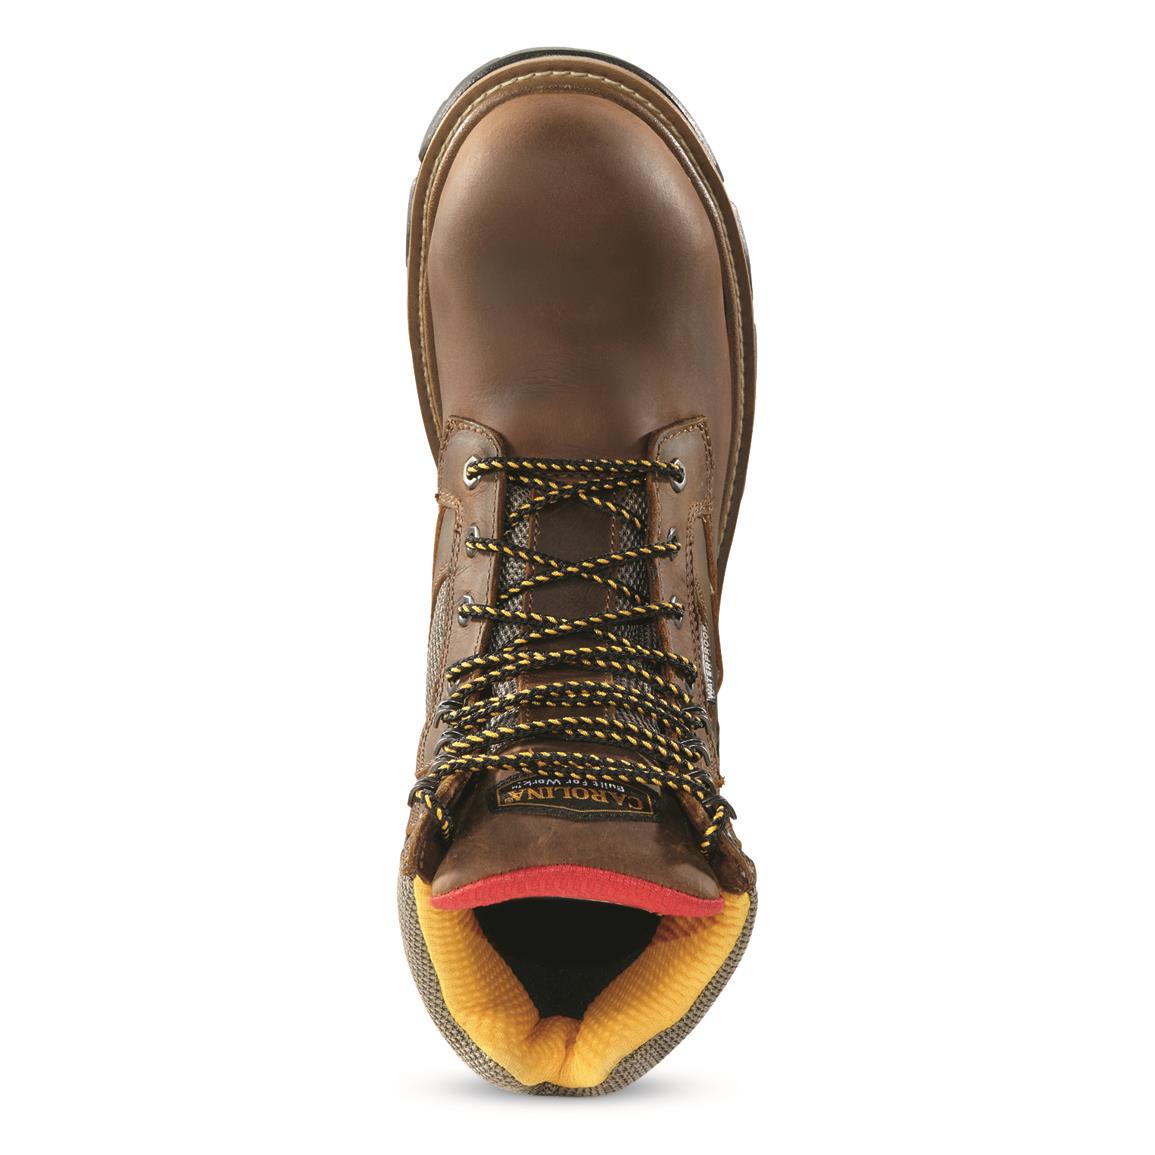 Volcom True Composite Toe Work Shoes - 736770, Work Boots at Sportsman ...